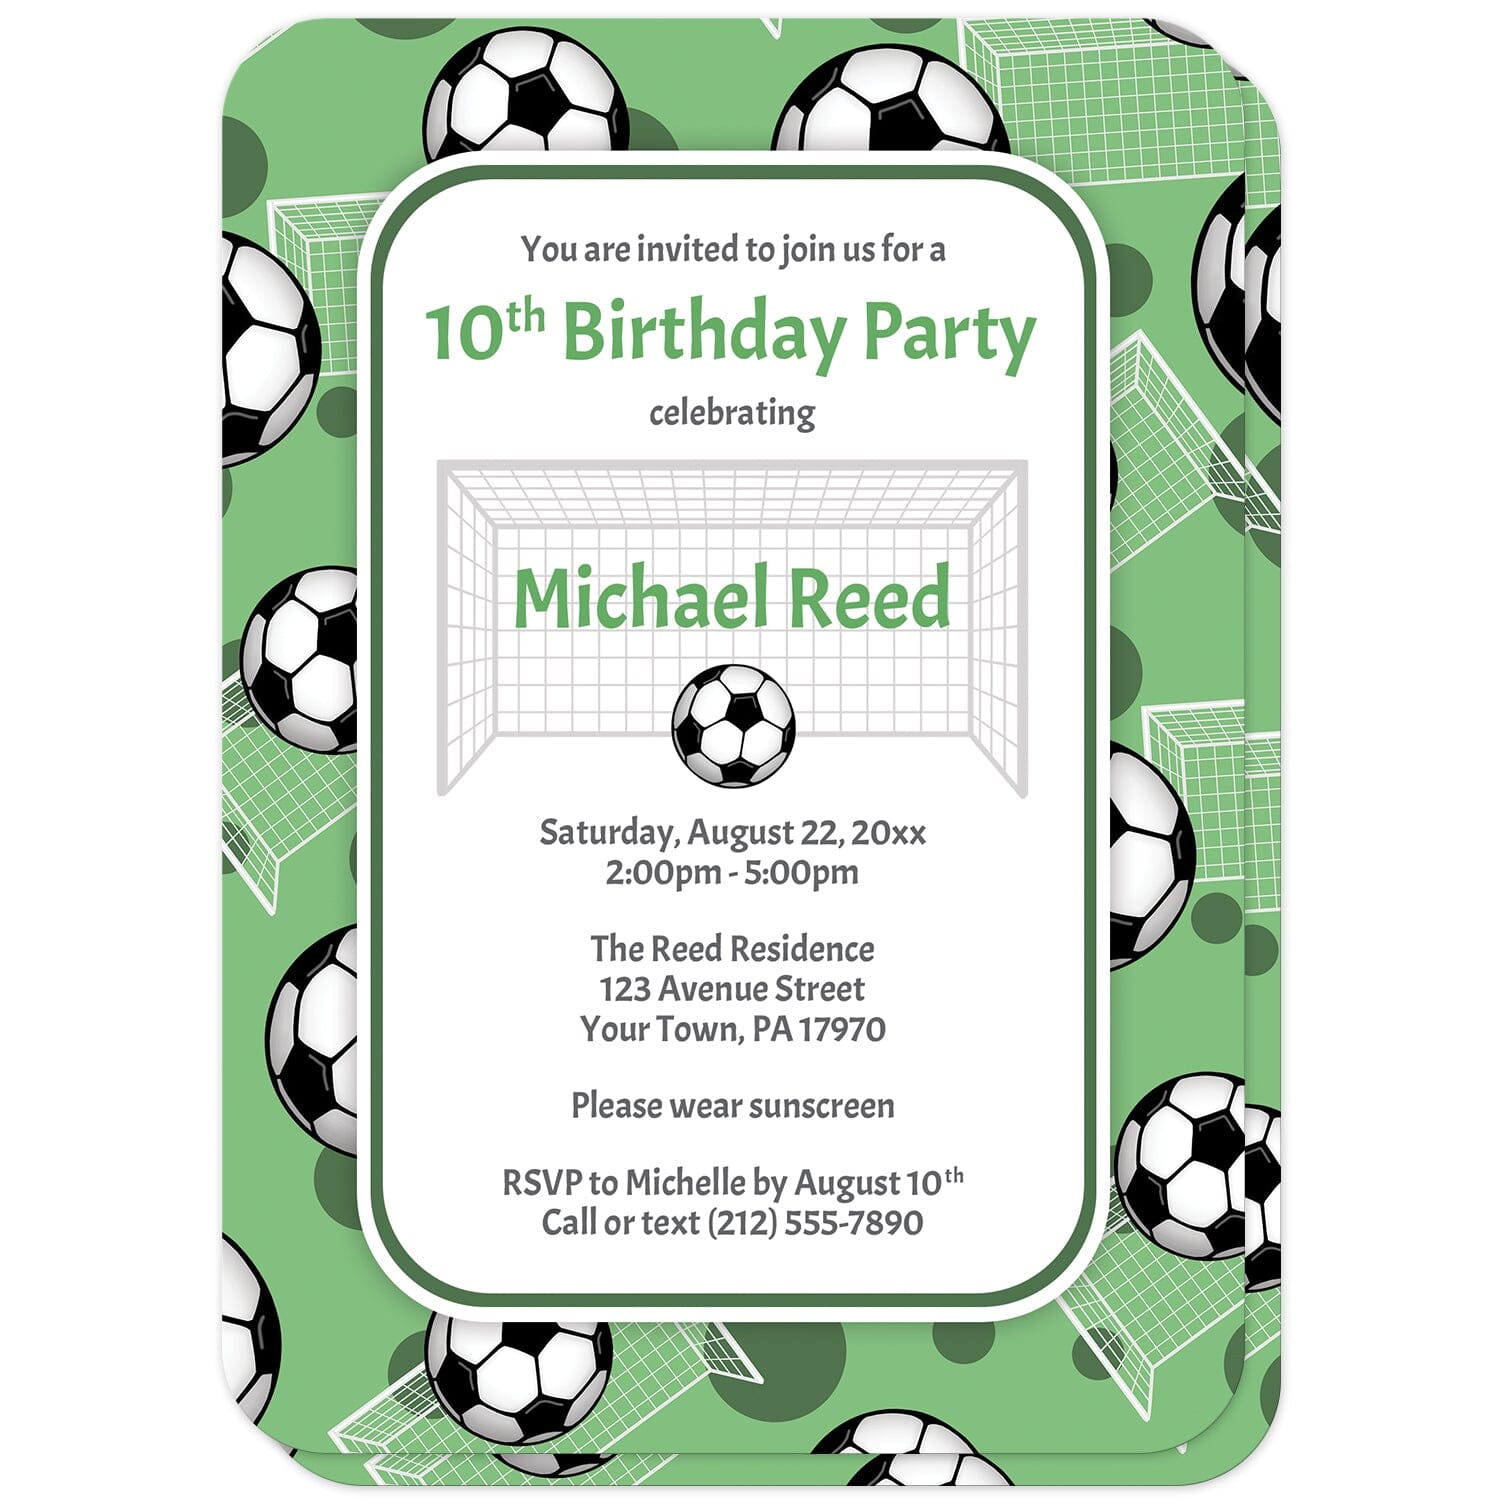 Soccer Ball and Goal Green Birthday Party Invitations (with rounded corners) at Artistically Invited. Sports-themed soccer ball and goal green birthday party invitations for any age or milestone that are uniquely illustrated with a pattern of soccer balls and soccer goals over a green background color. Your personalized birthday party details are custom printed in green and gray over white in the center over the soccer pattern.